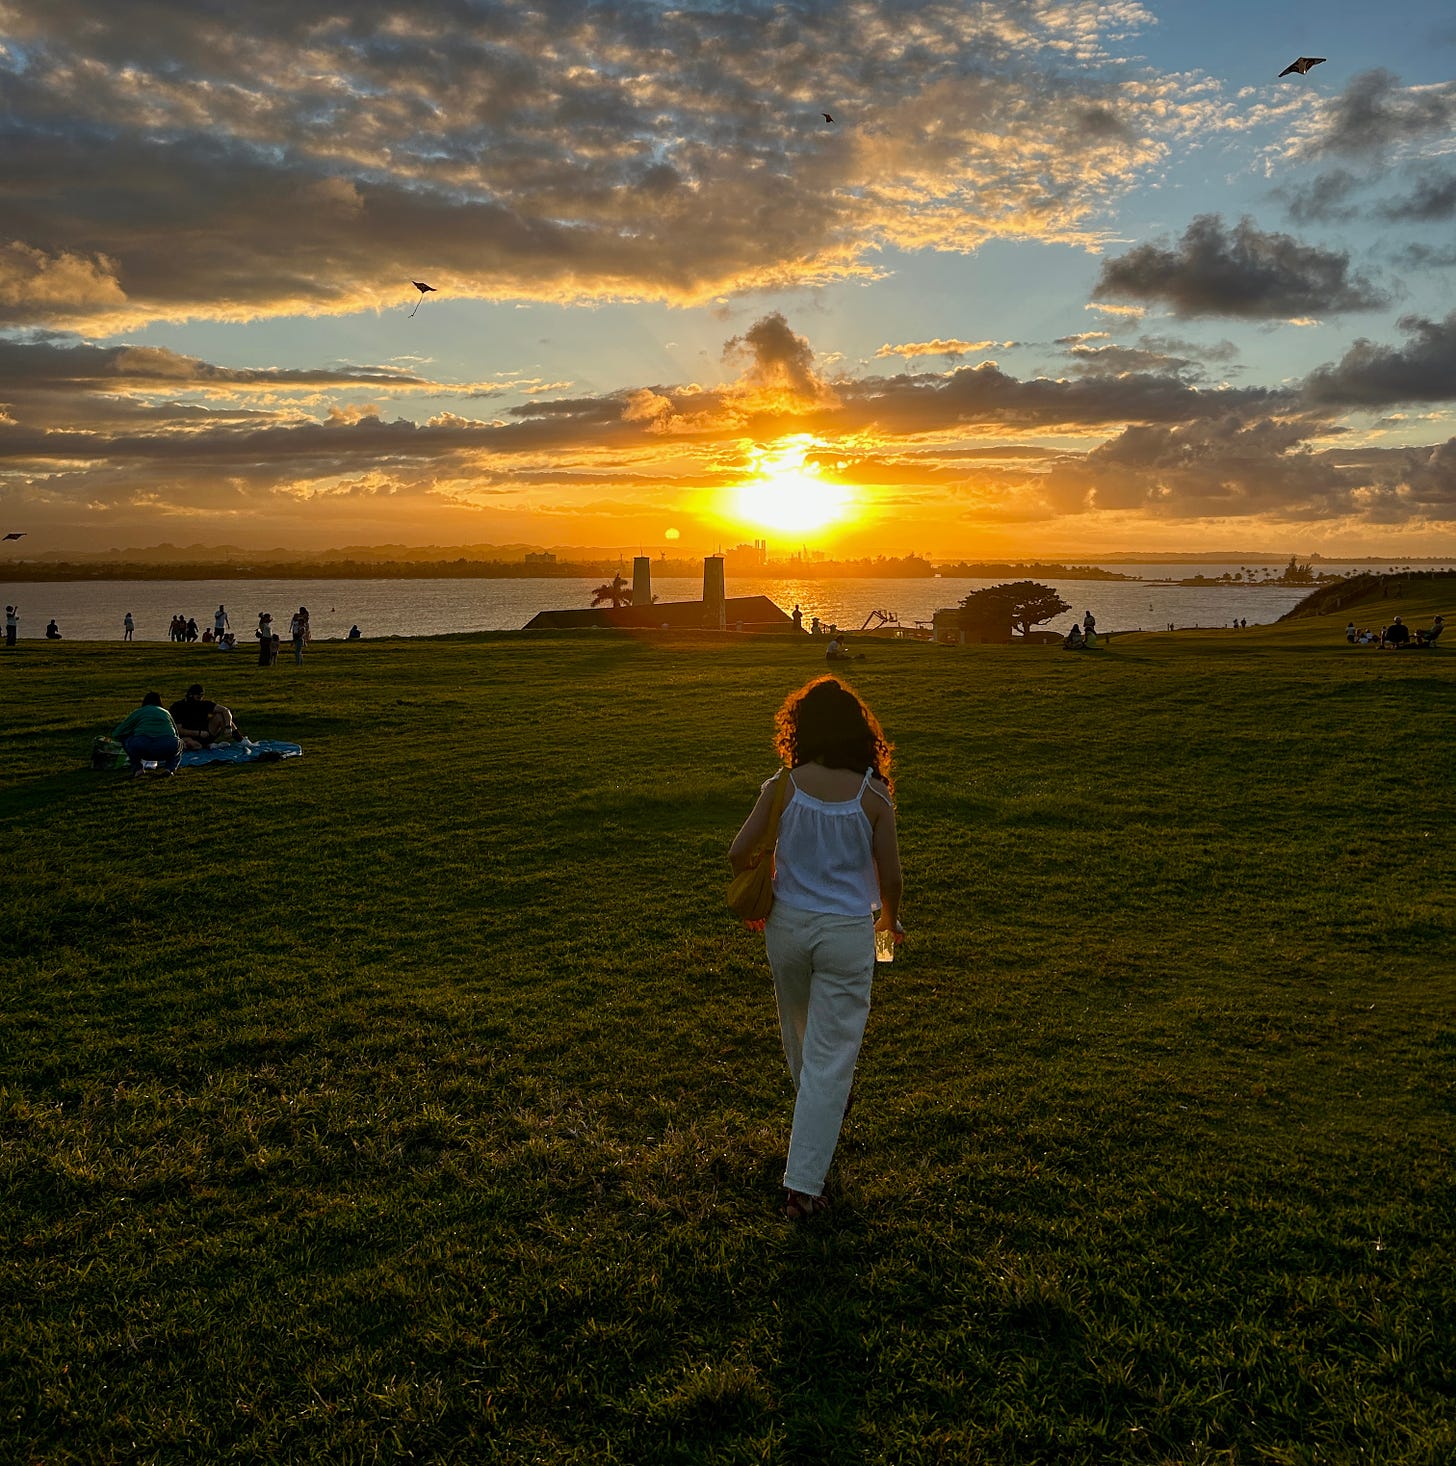 Isa, with dark curly hair and wearing a white blouse and jeans, has her back to the camera. She's walking on a sprawling green lawn toward the sunset, toward the water. Kites are visible floating overhead, and there are other people walking or laying in the park, too.